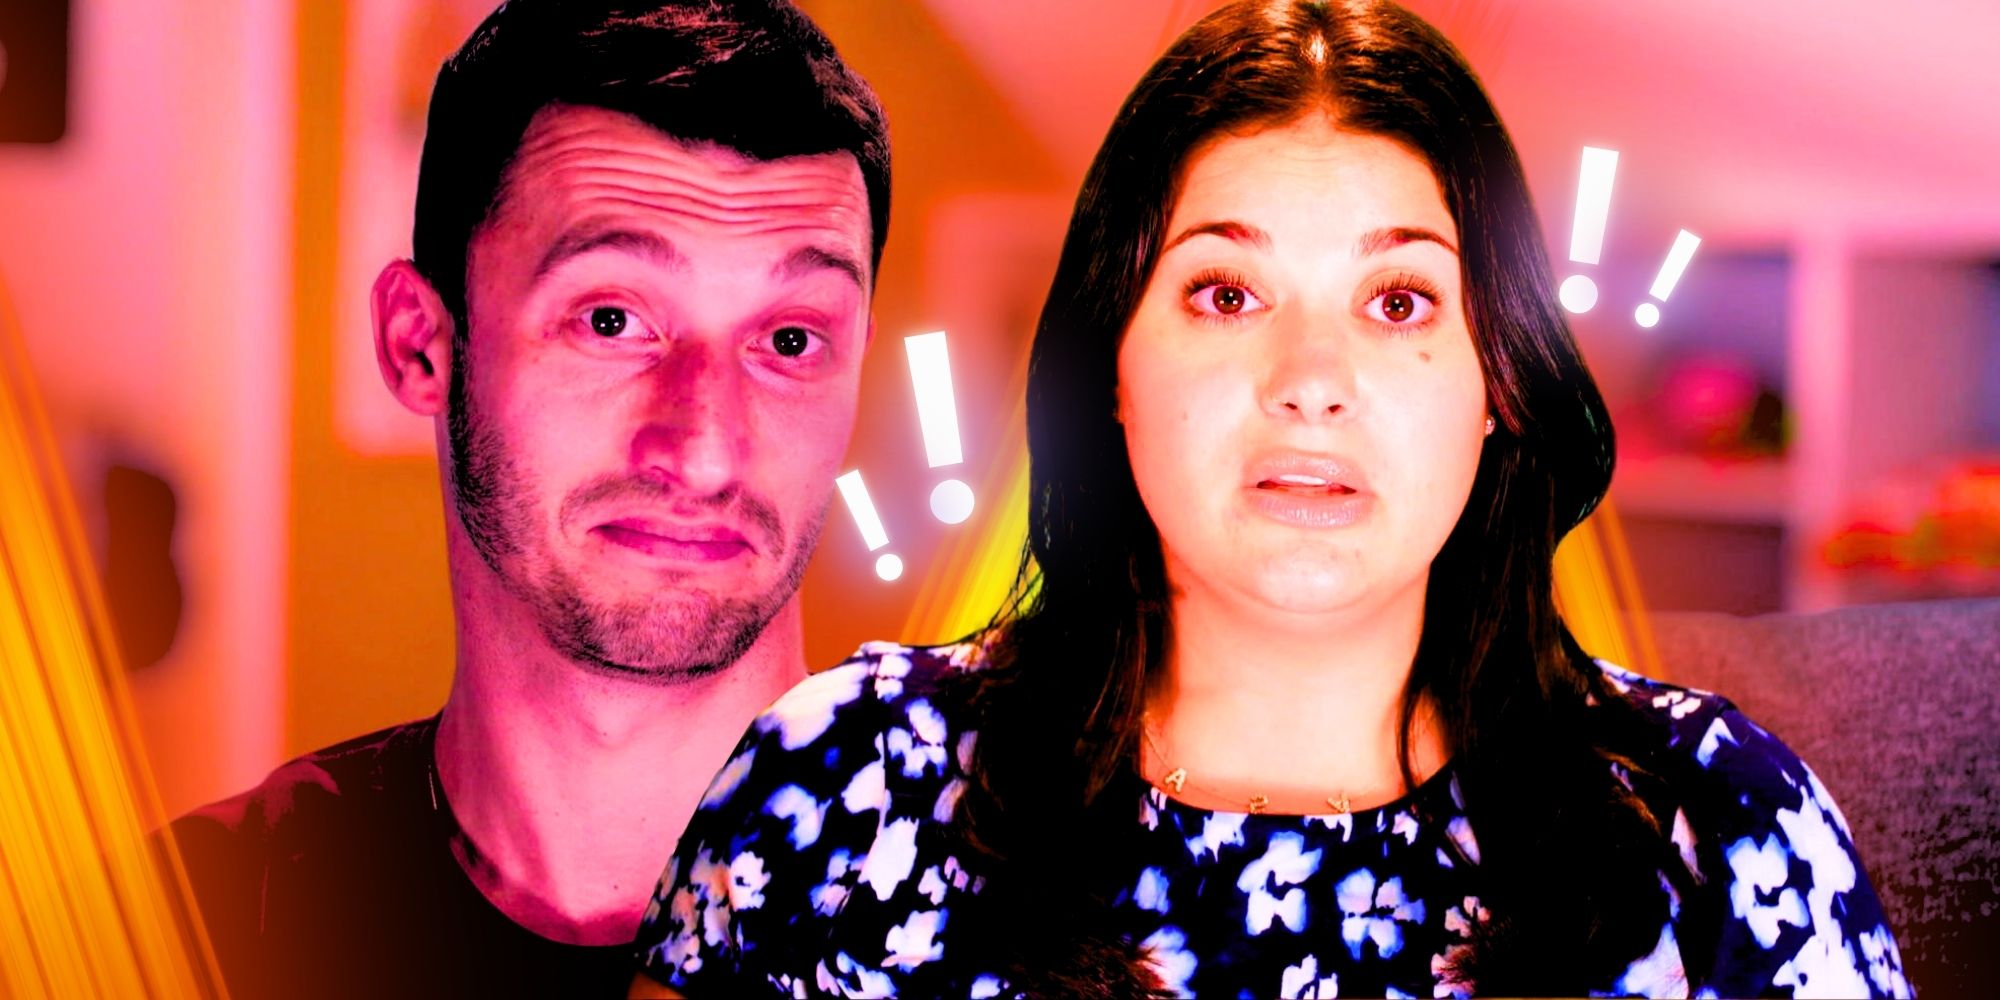 90 Day Fiancé's Alexei and Loren Brovarnik looking unsure with exclamation points and pink filtered background